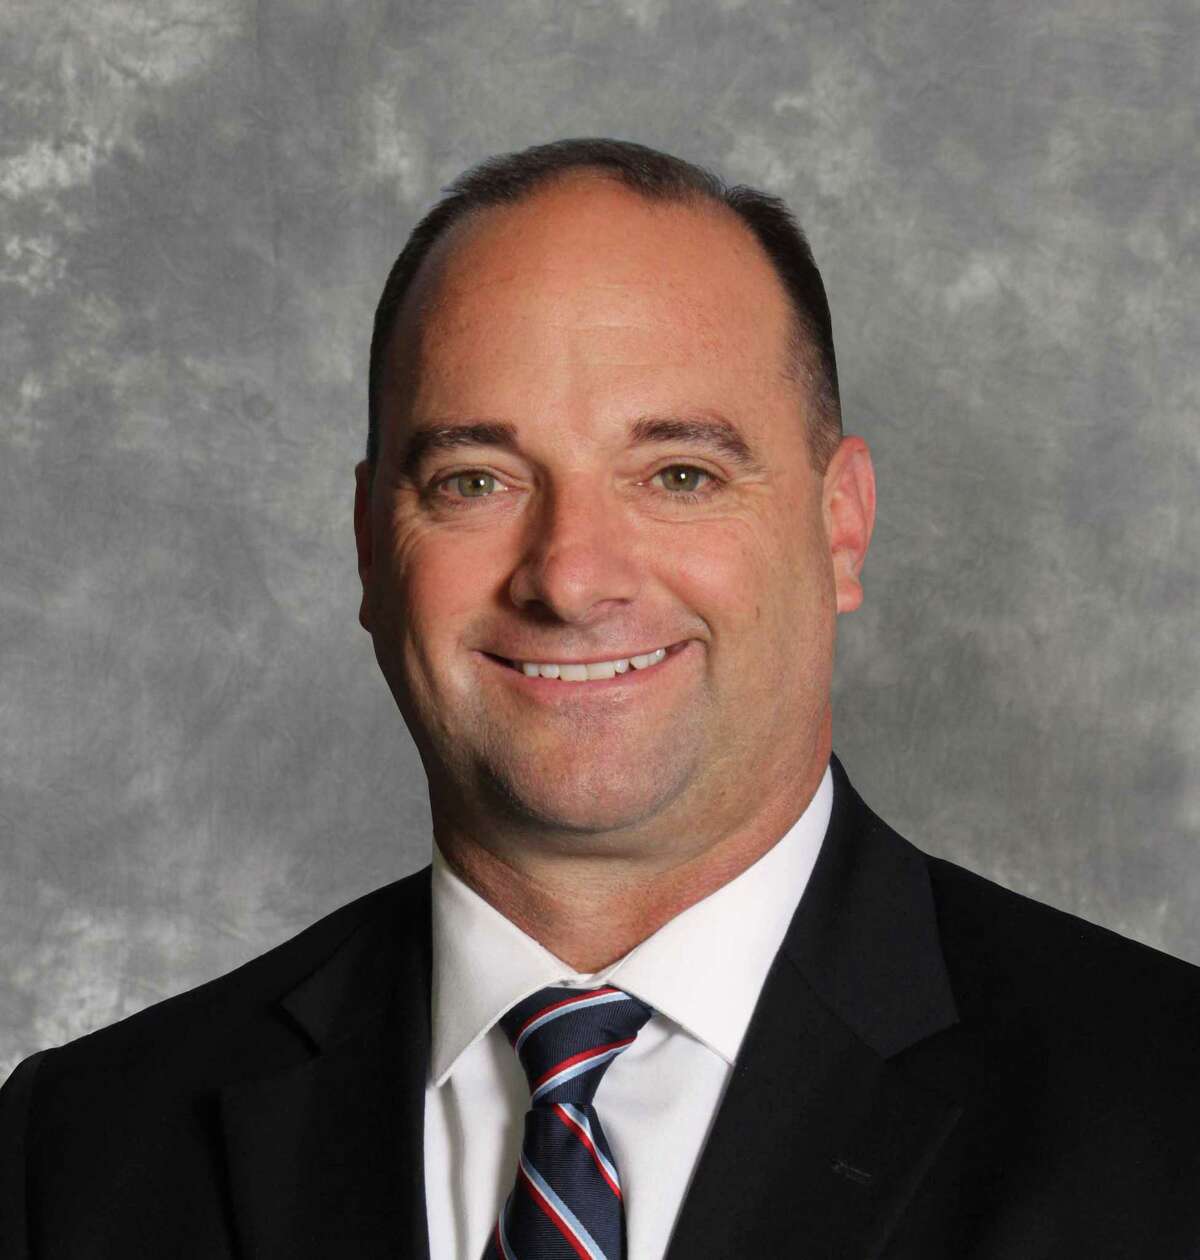 Trent Lovette, the finalist to be superintendent of La Vernia Independent School District is currently chief of governance, policy and program evaluation for Crowley ISD.